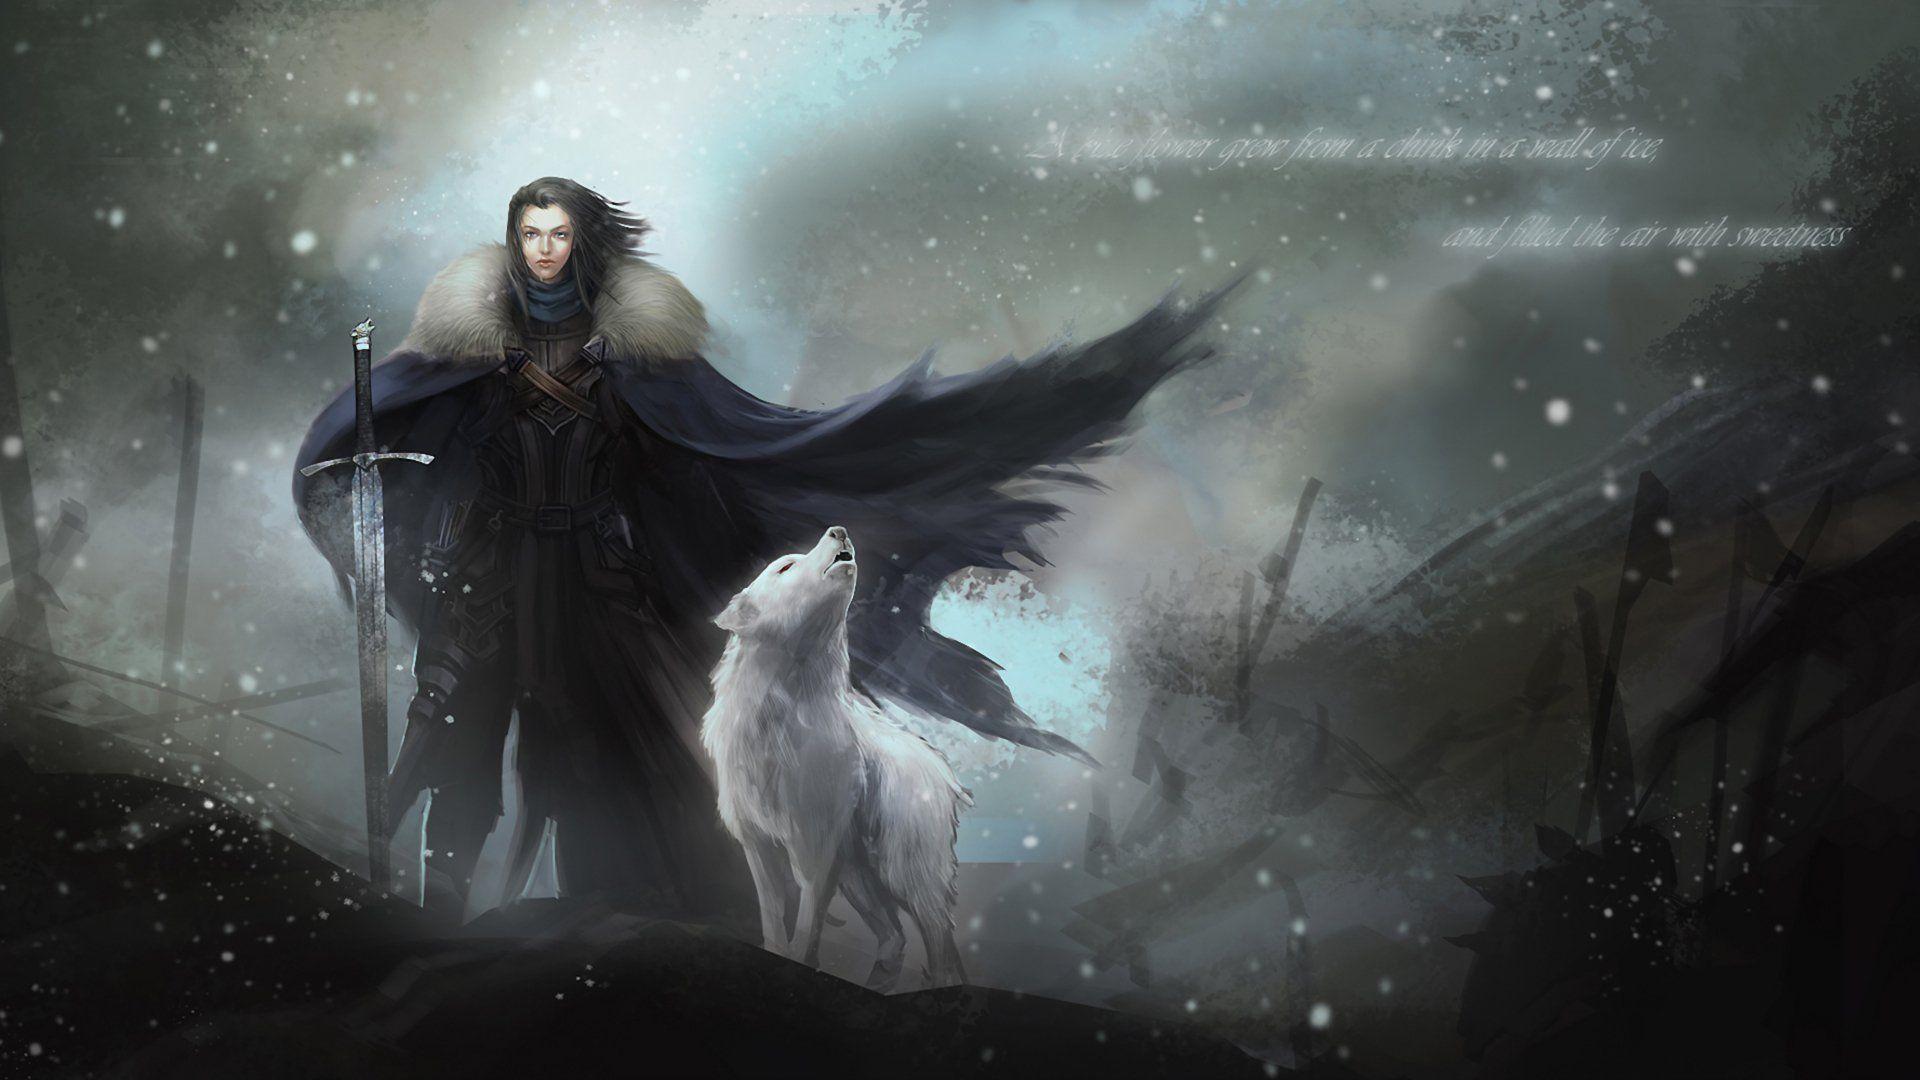 Game Of Thrones Art Wallpapers Top Free Game Of Thrones Art Images, Photos, Reviews